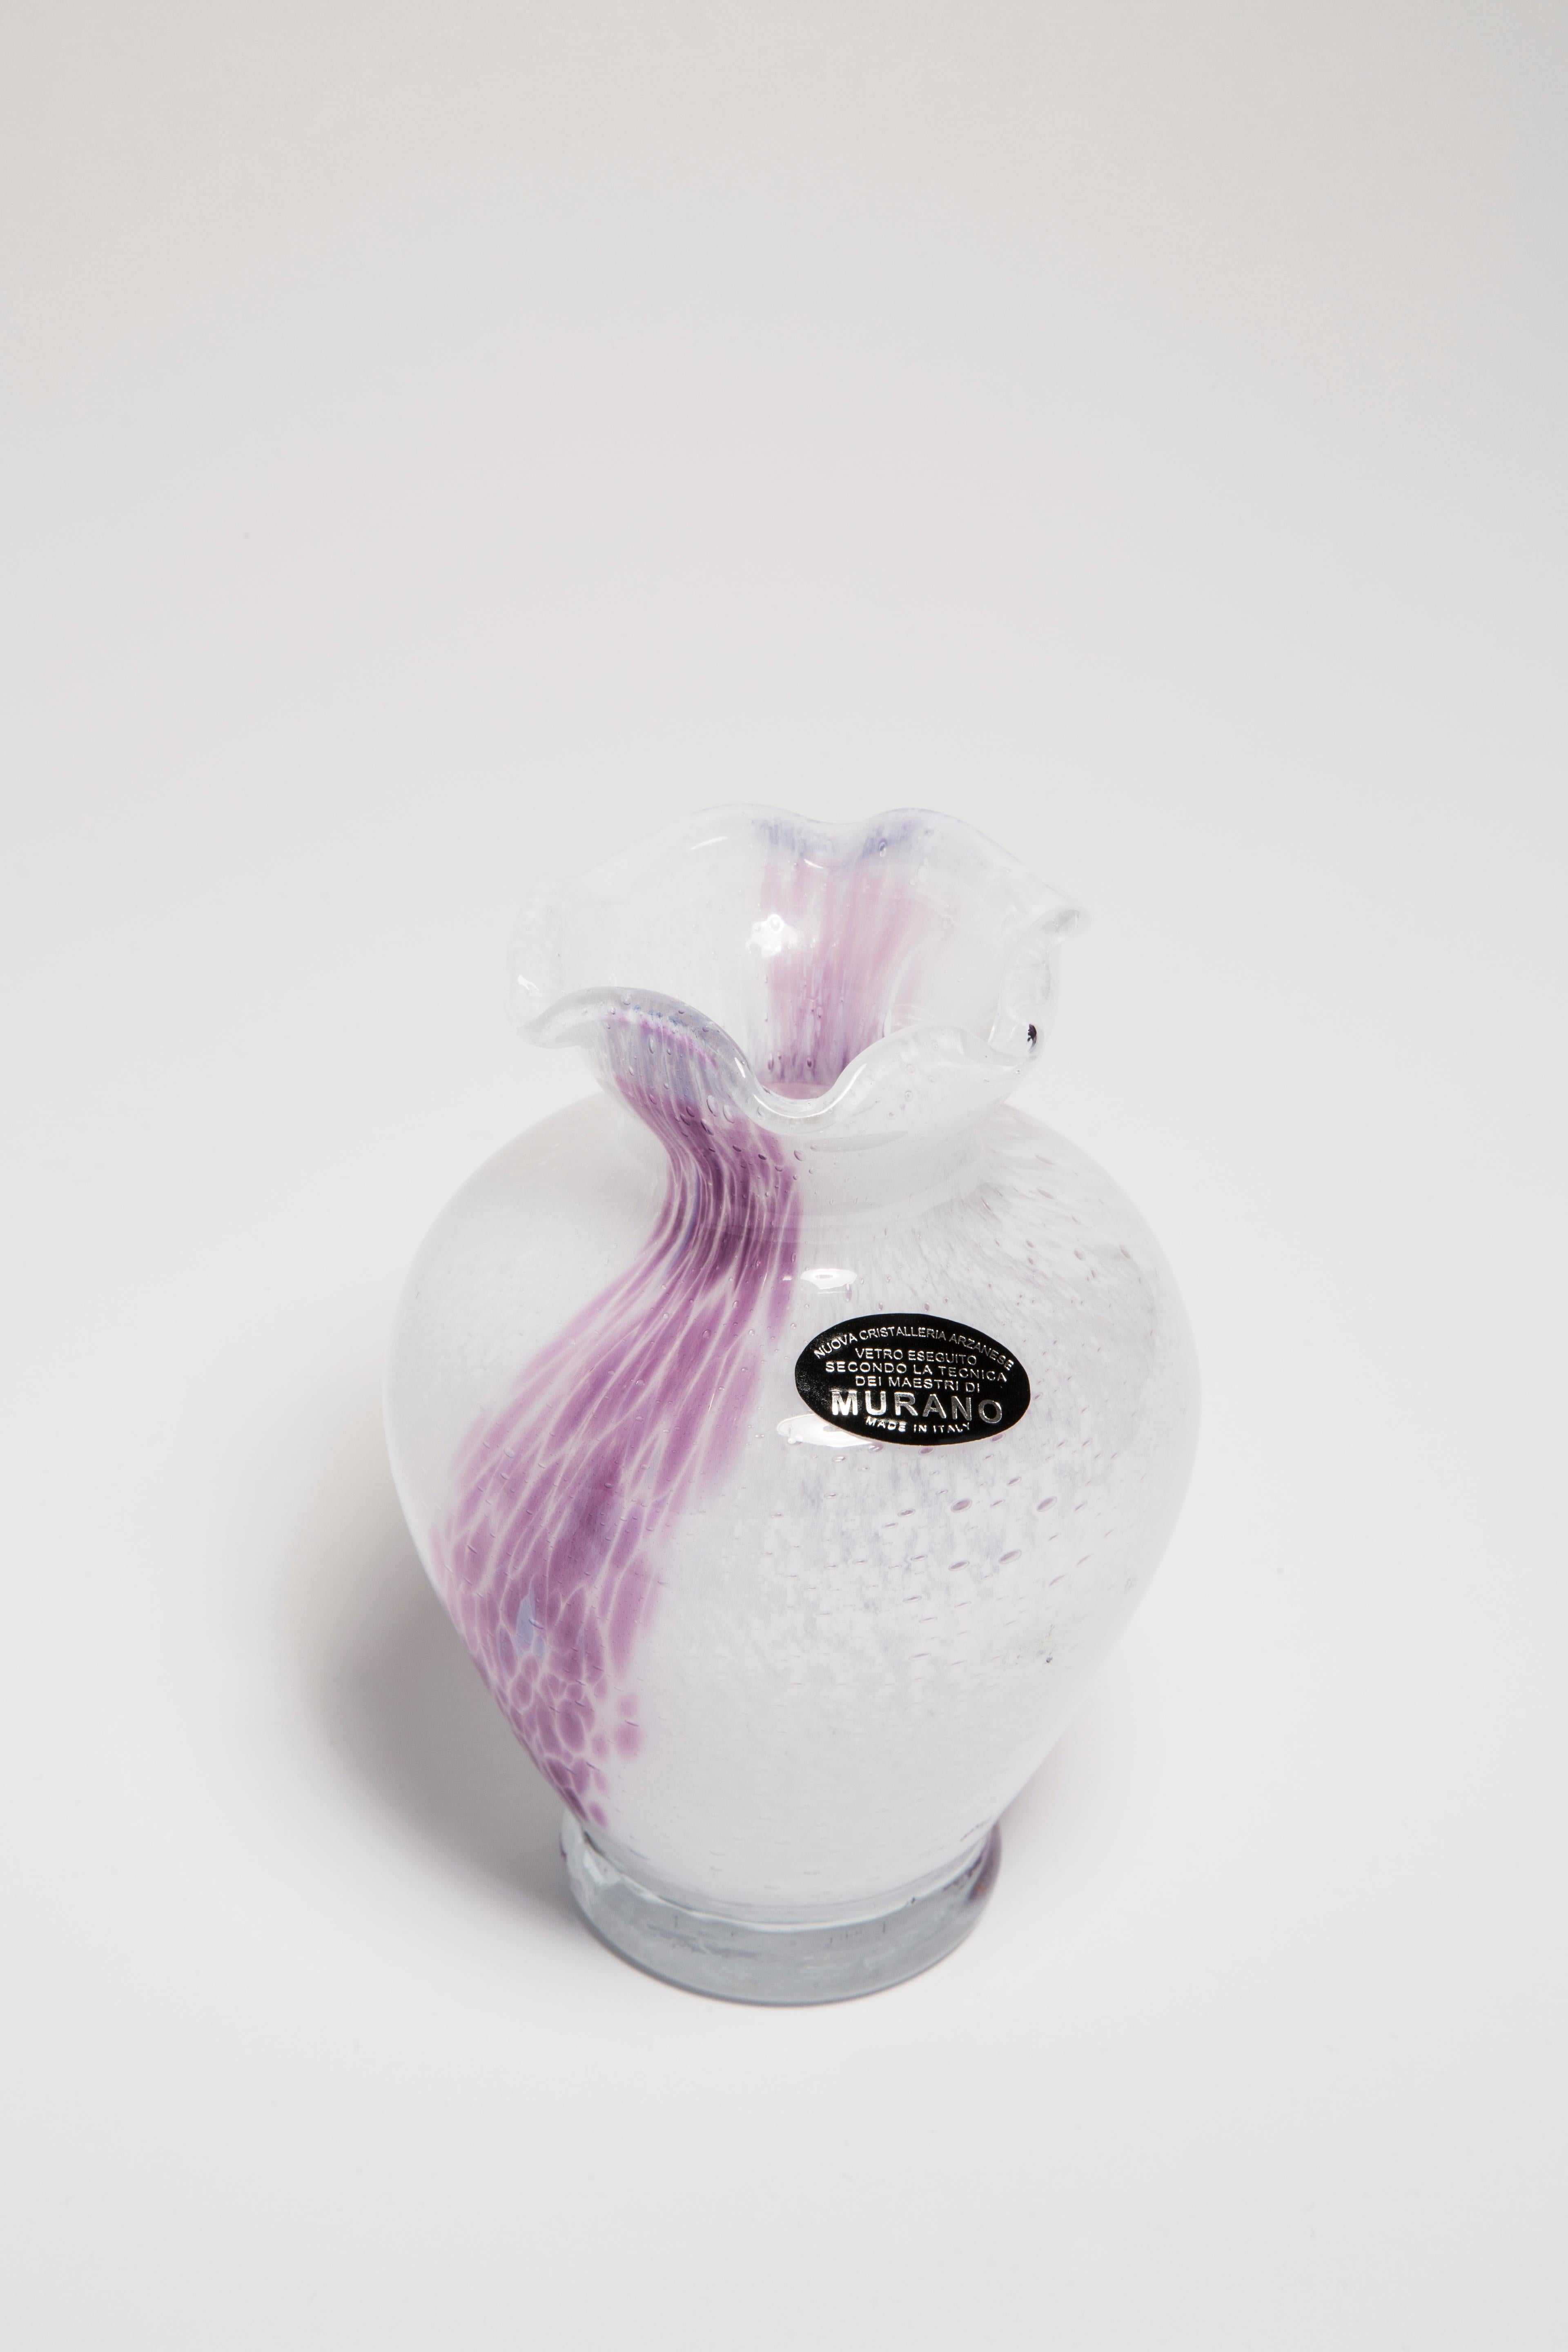 Mid Century Vintage White and Purple Small Murano Vase, Italy, 1960s For Sale 5